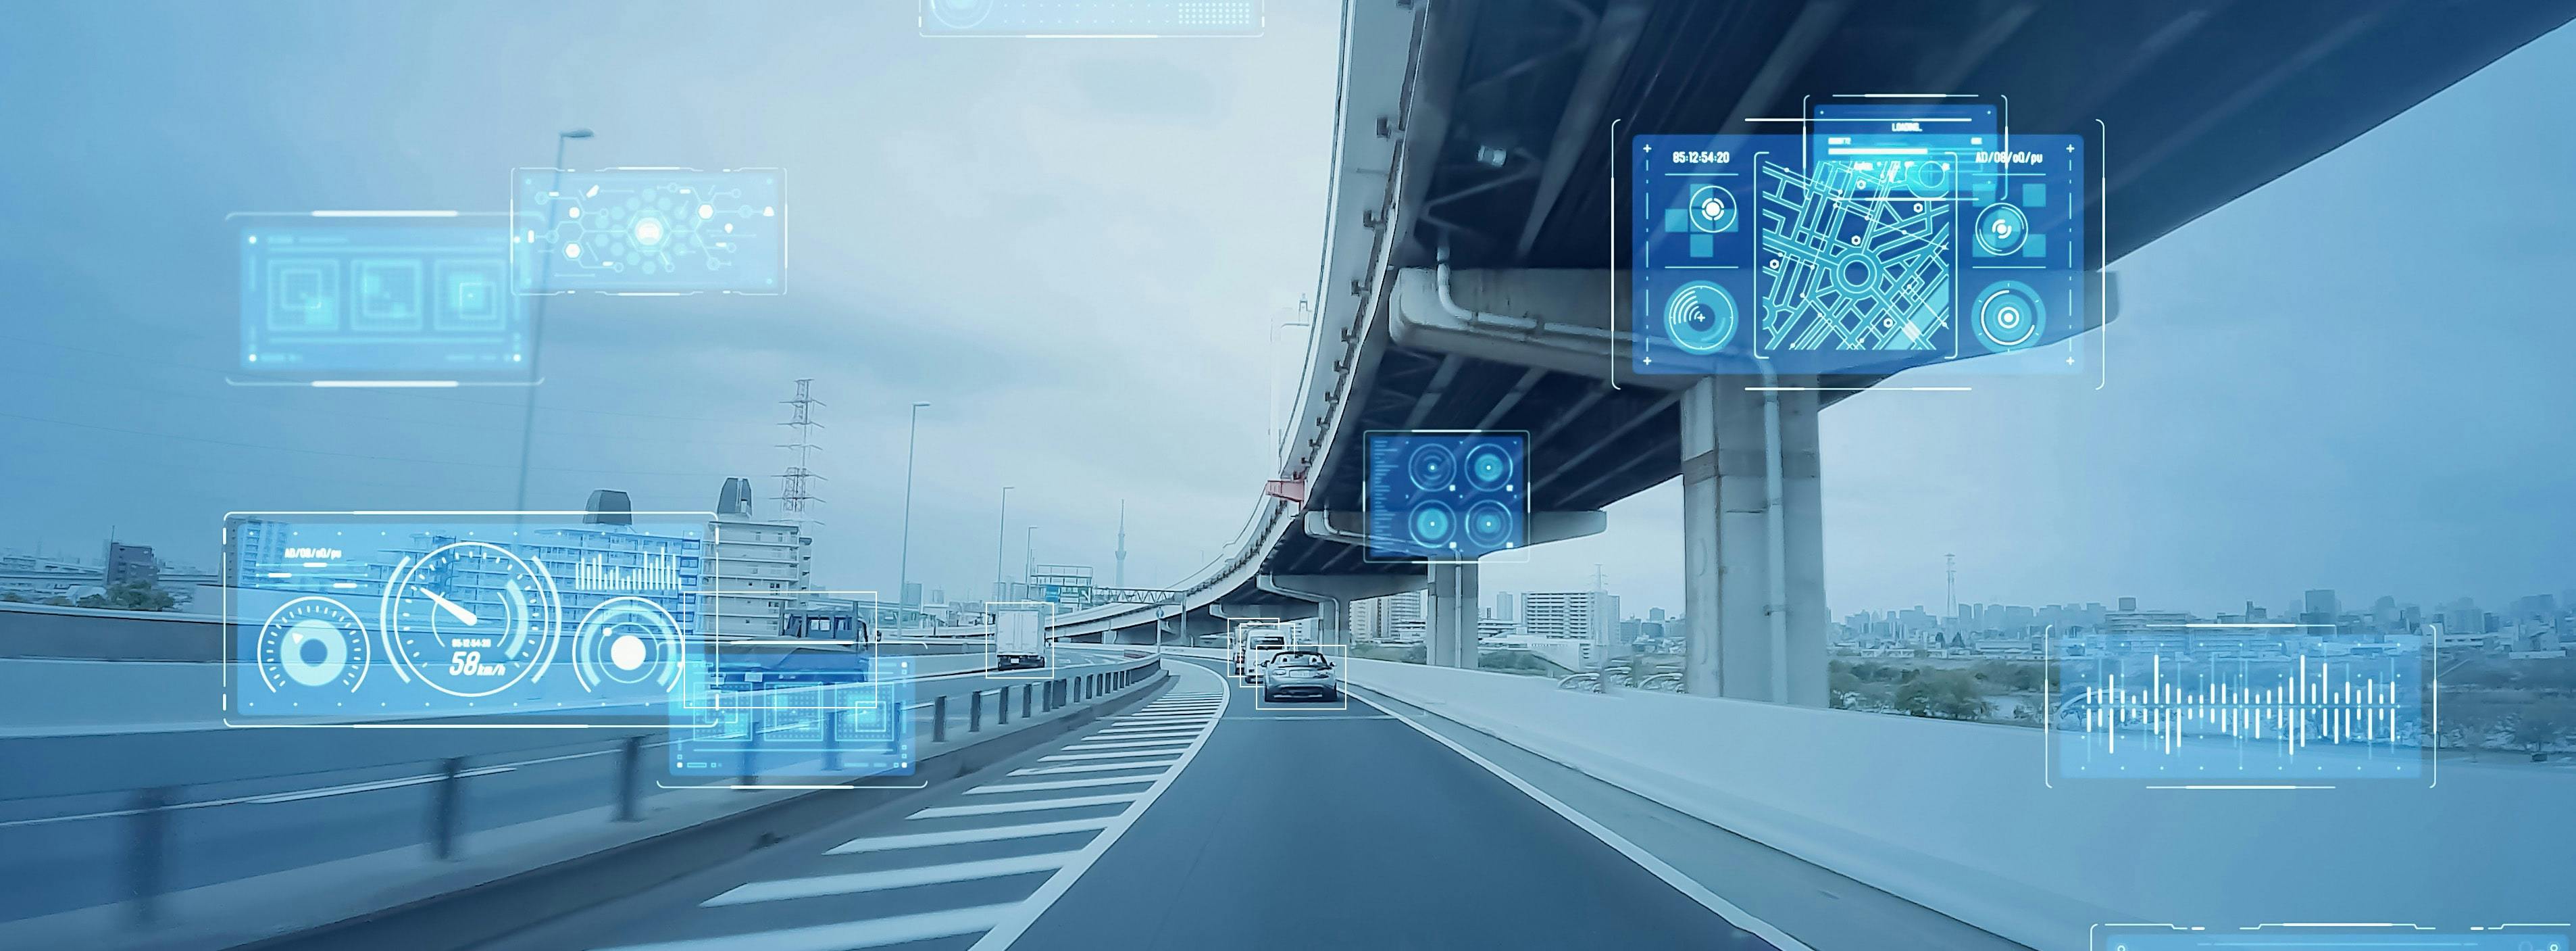 View from autonomous car driving on highway with illustrated graphics of sensors and data